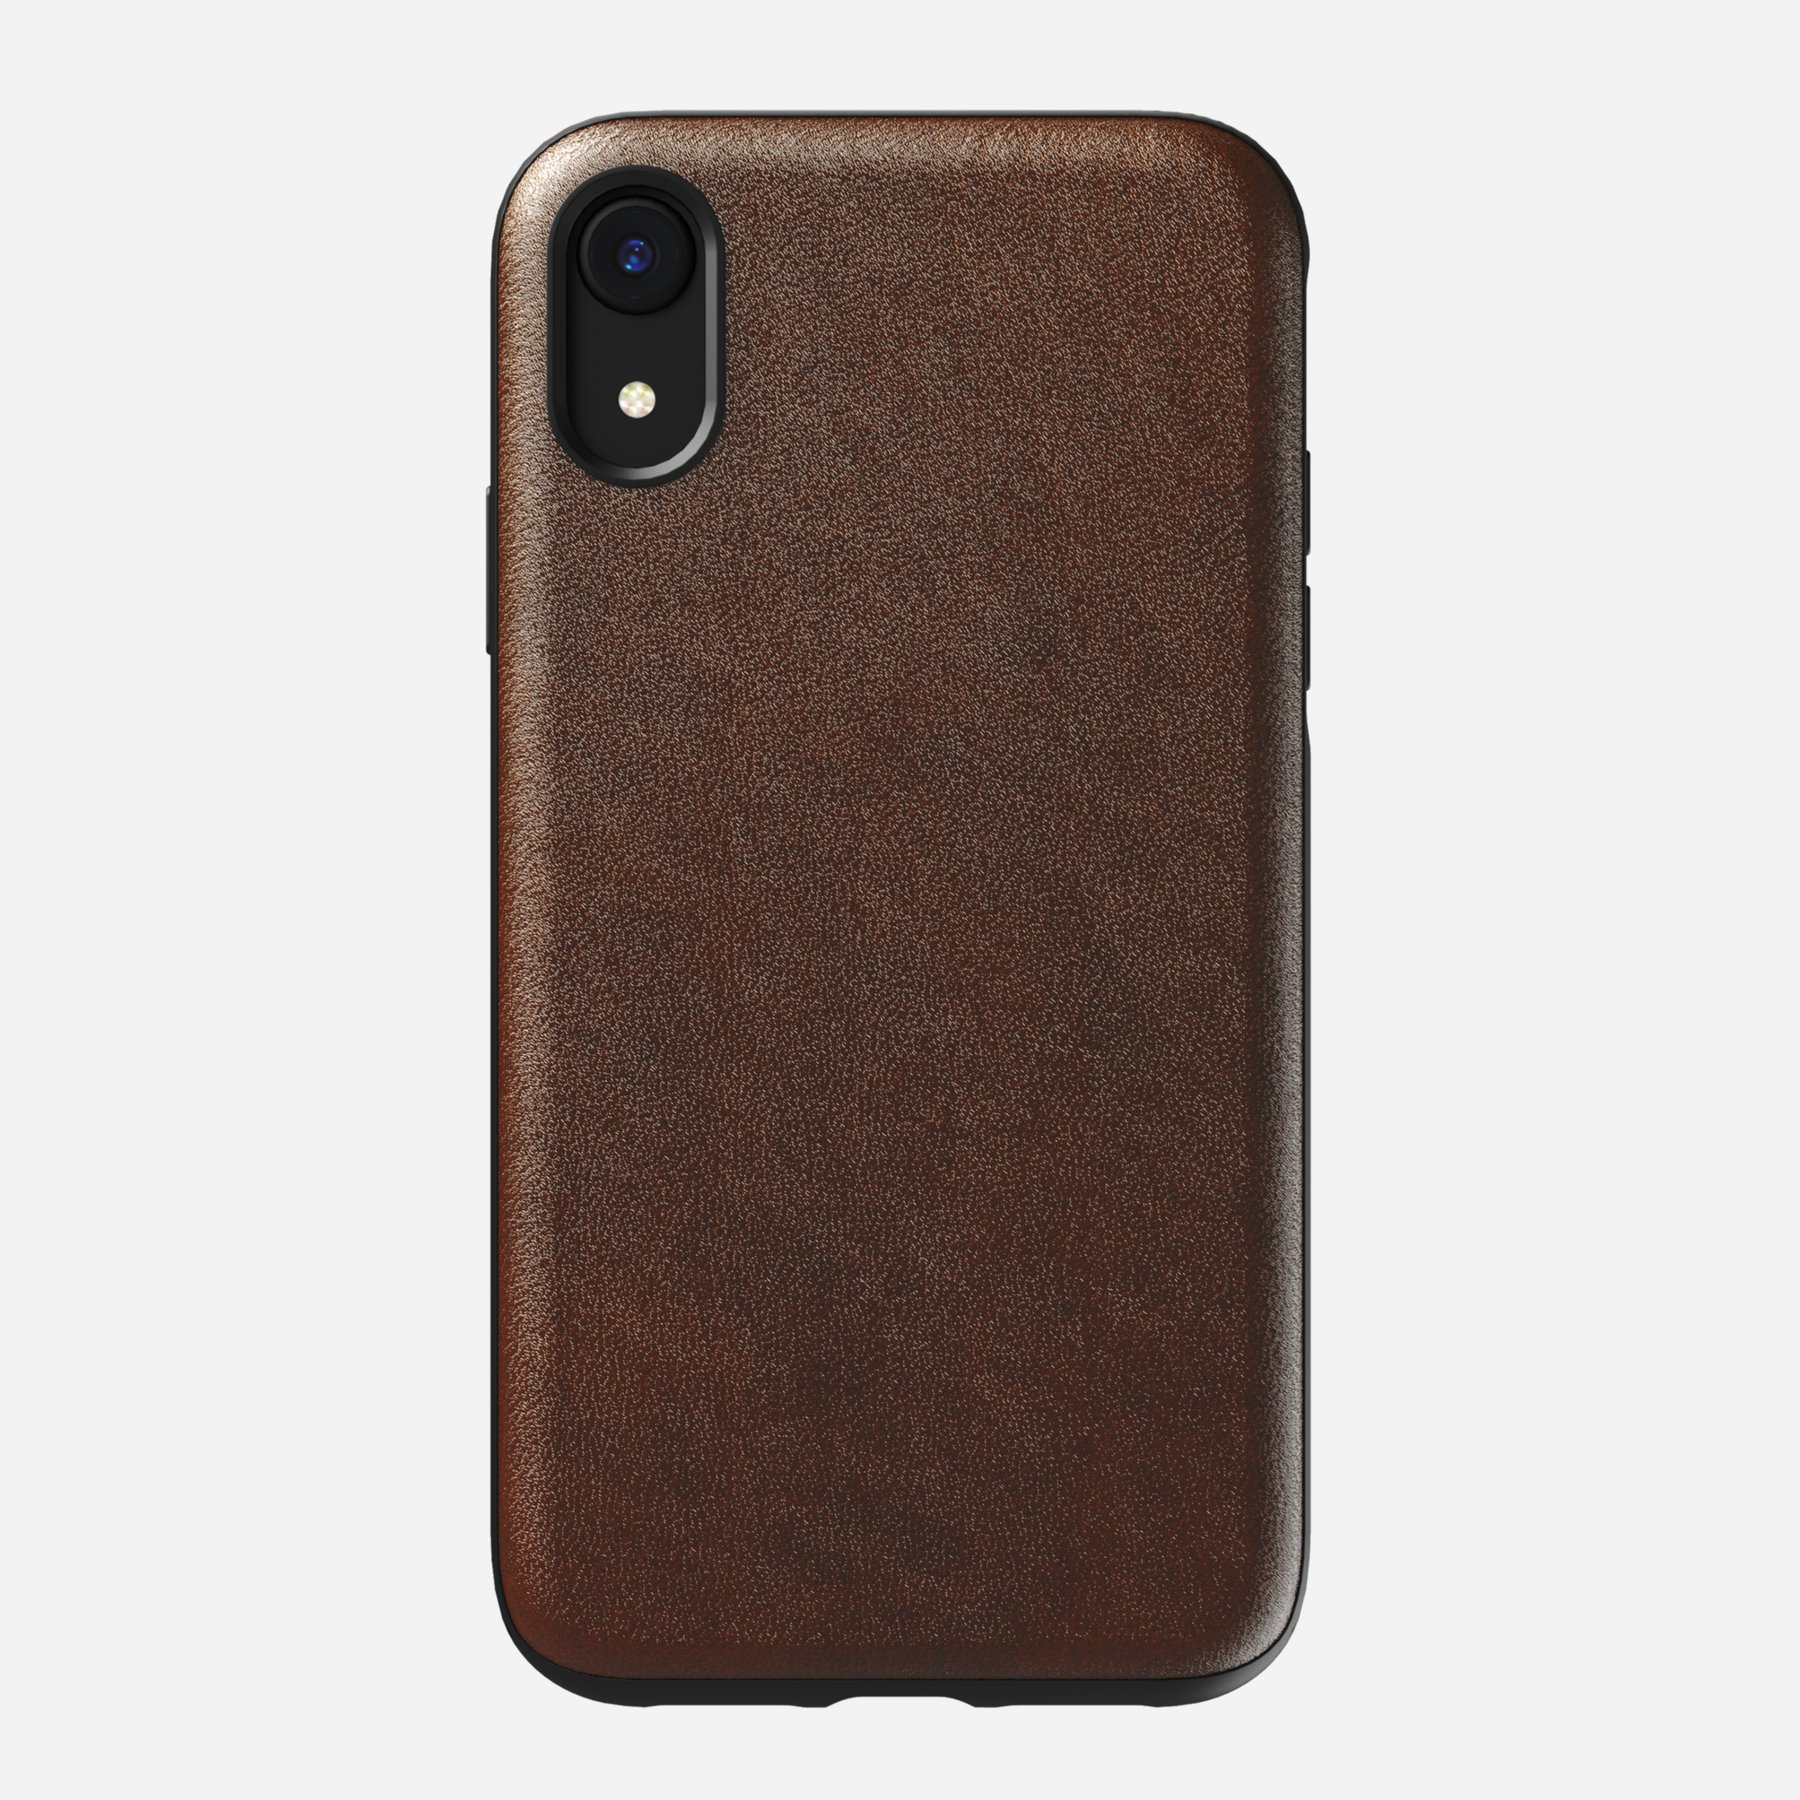 Nomad Rugged Leather Case Rustic Brown for iPhone XR